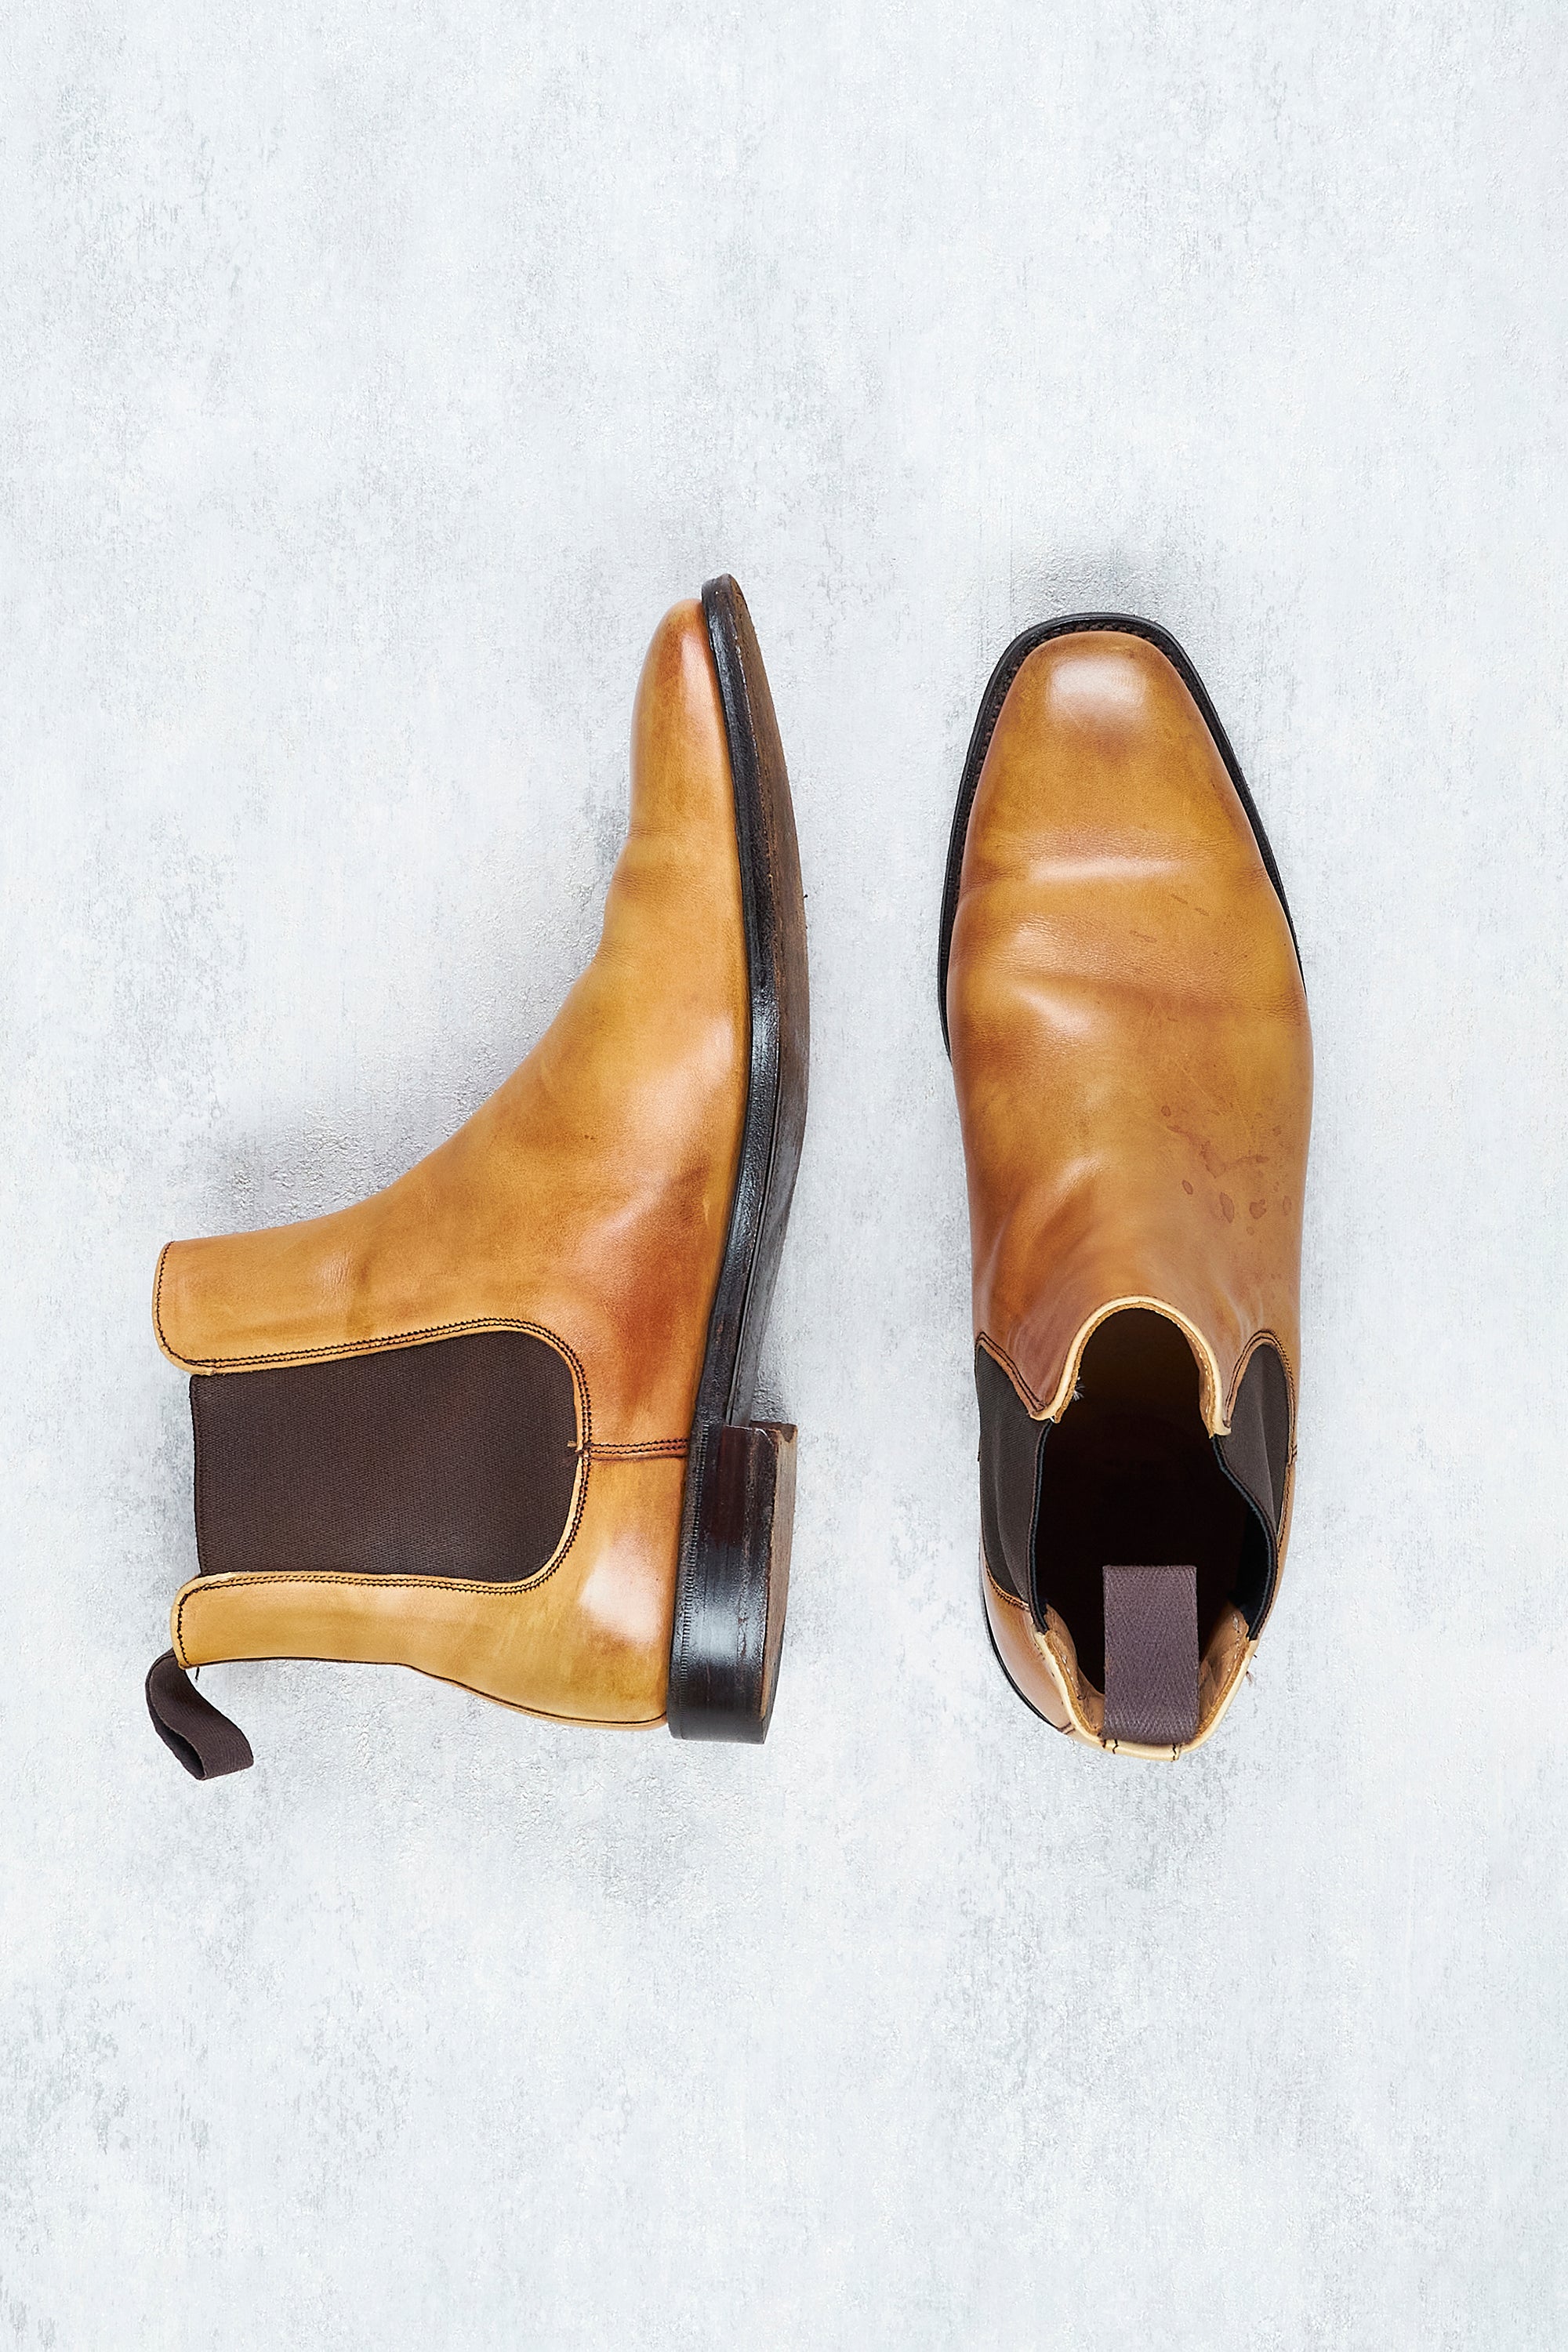 The Armoury Maple Calf Chelsea Boots